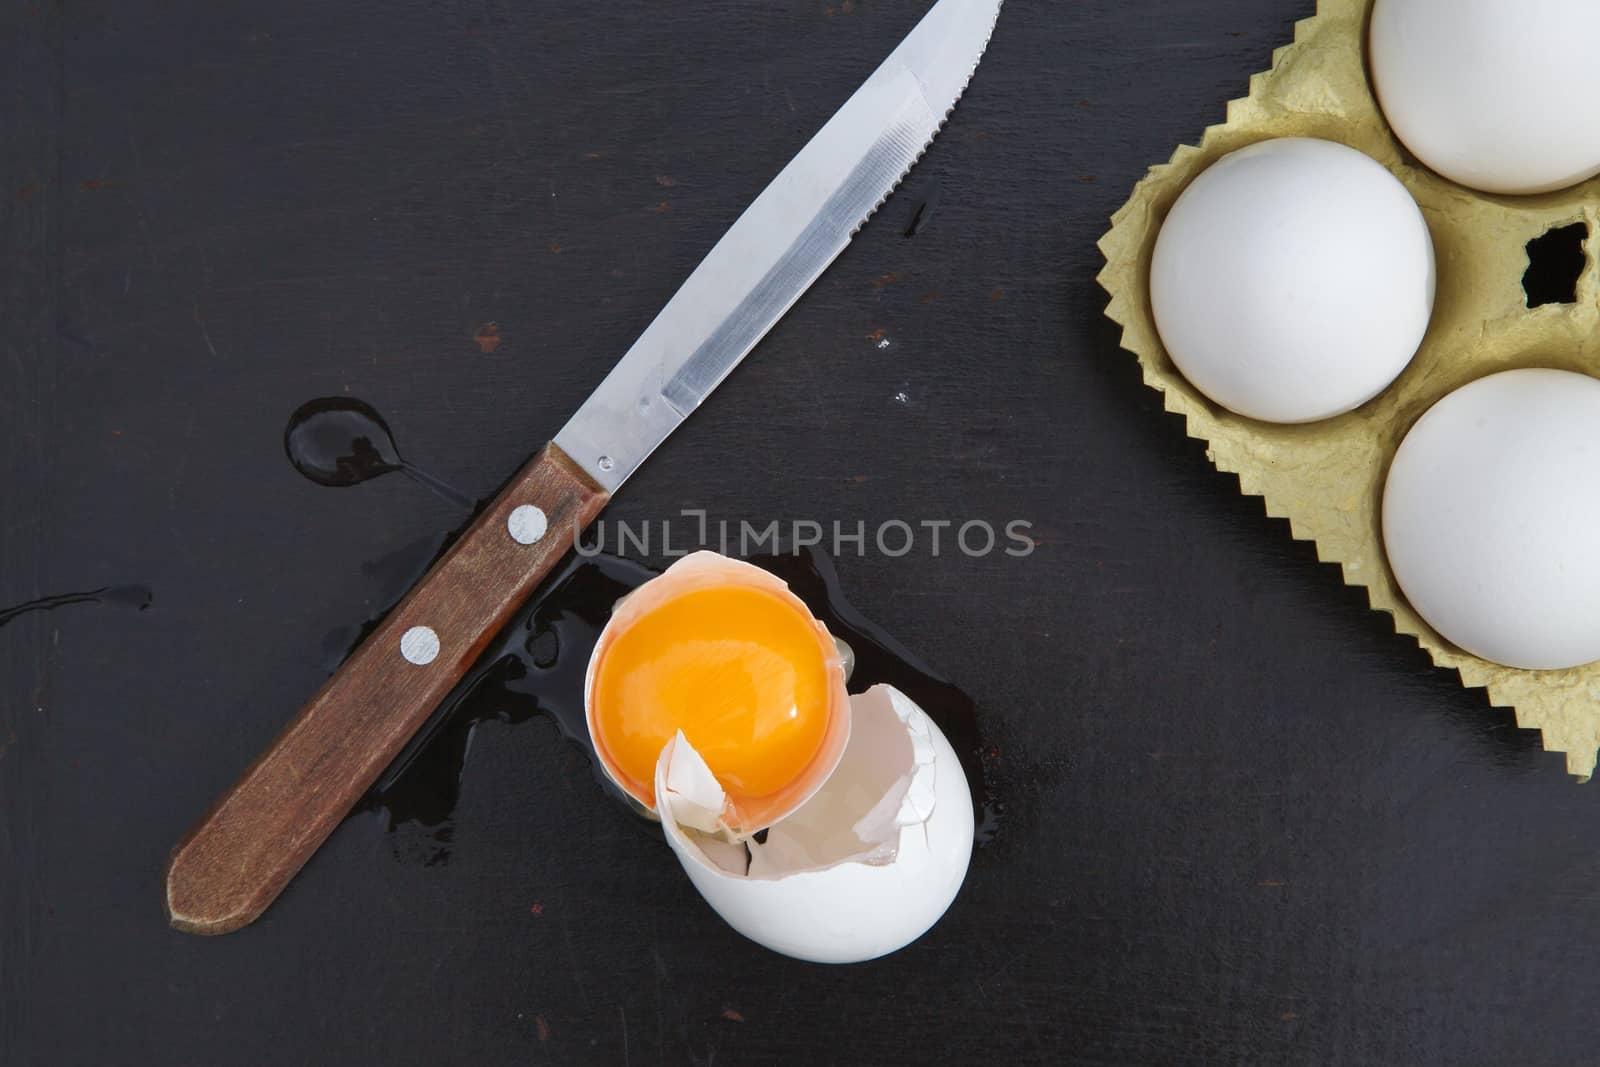 Broken egg, a knife with wooden handle and three white chicken eggs on the black wooden surface